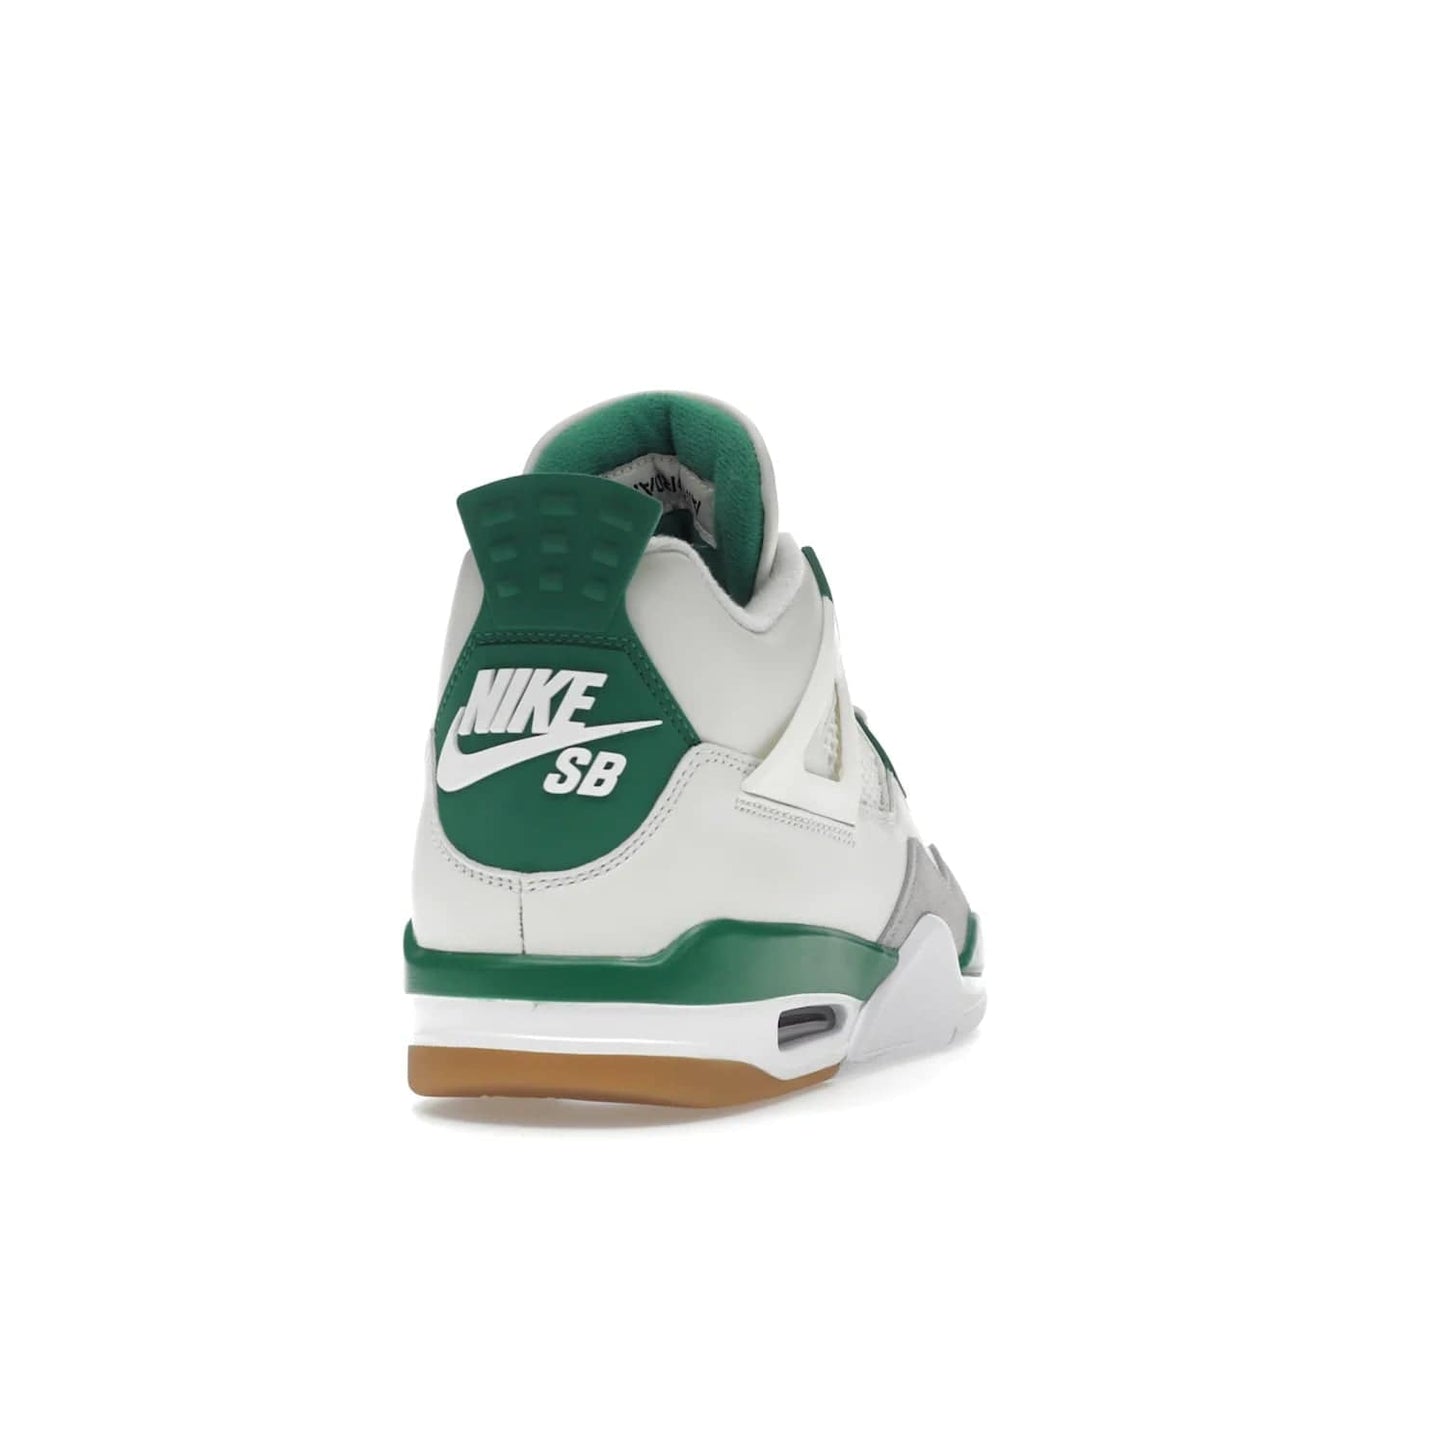 Jordan 4 Retro SB Pine Green - Image 30 - Only at www.BallersClubKickz.com - A white leather upper combined with a Neutral Grey suede mudguard gives this limited Air Jordan 4 Retro SB Pine Green sneaker its unmistakable style. Released March 20, 2023, the Jordan 4 Retro SB features a white and Pine Green midsole plus a red air unit with a gum outsole for grip. The perfect blend of Nike SB skateboarding and Jordan 4 classic design.